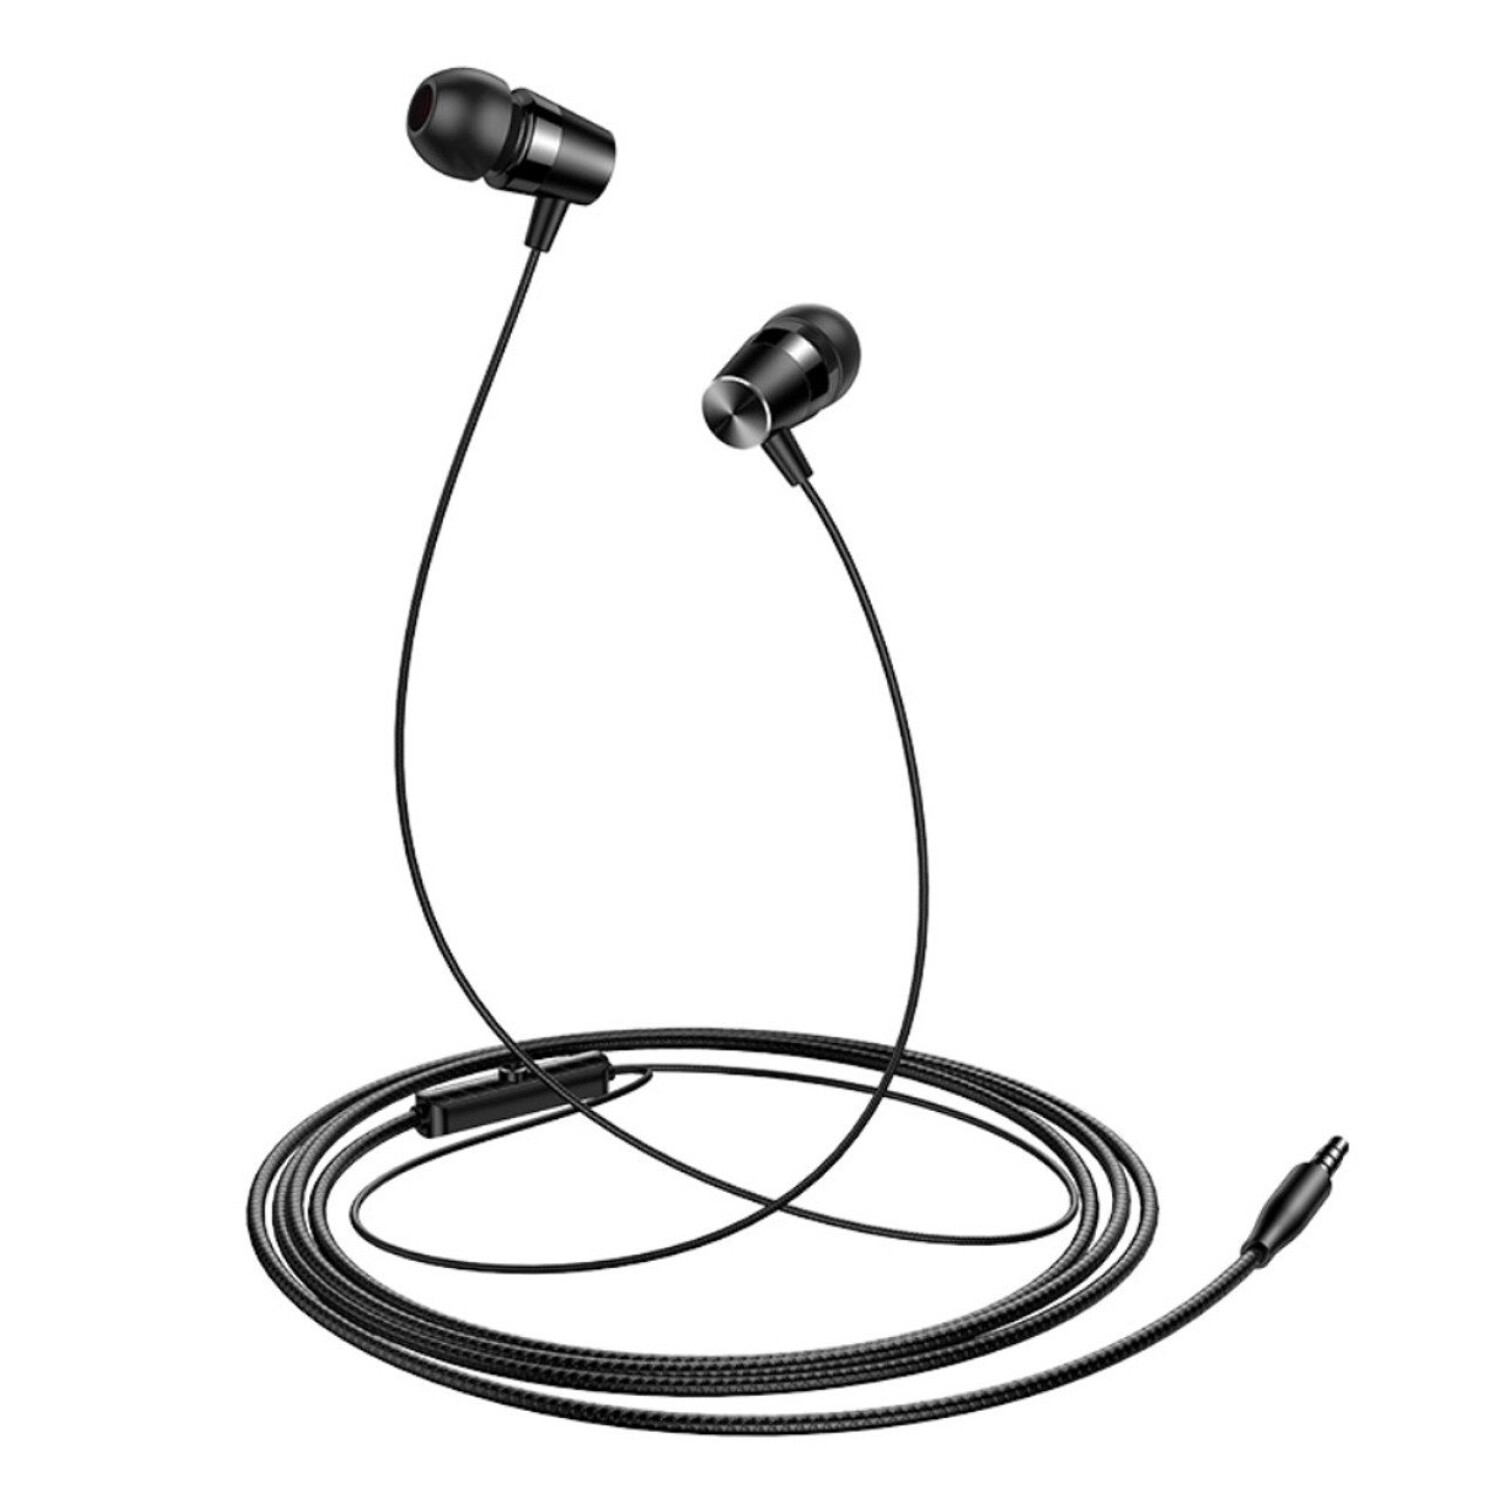 Auriculares con cable Contact, Jack 3.5 mm, Longitud 120 cm, Negro